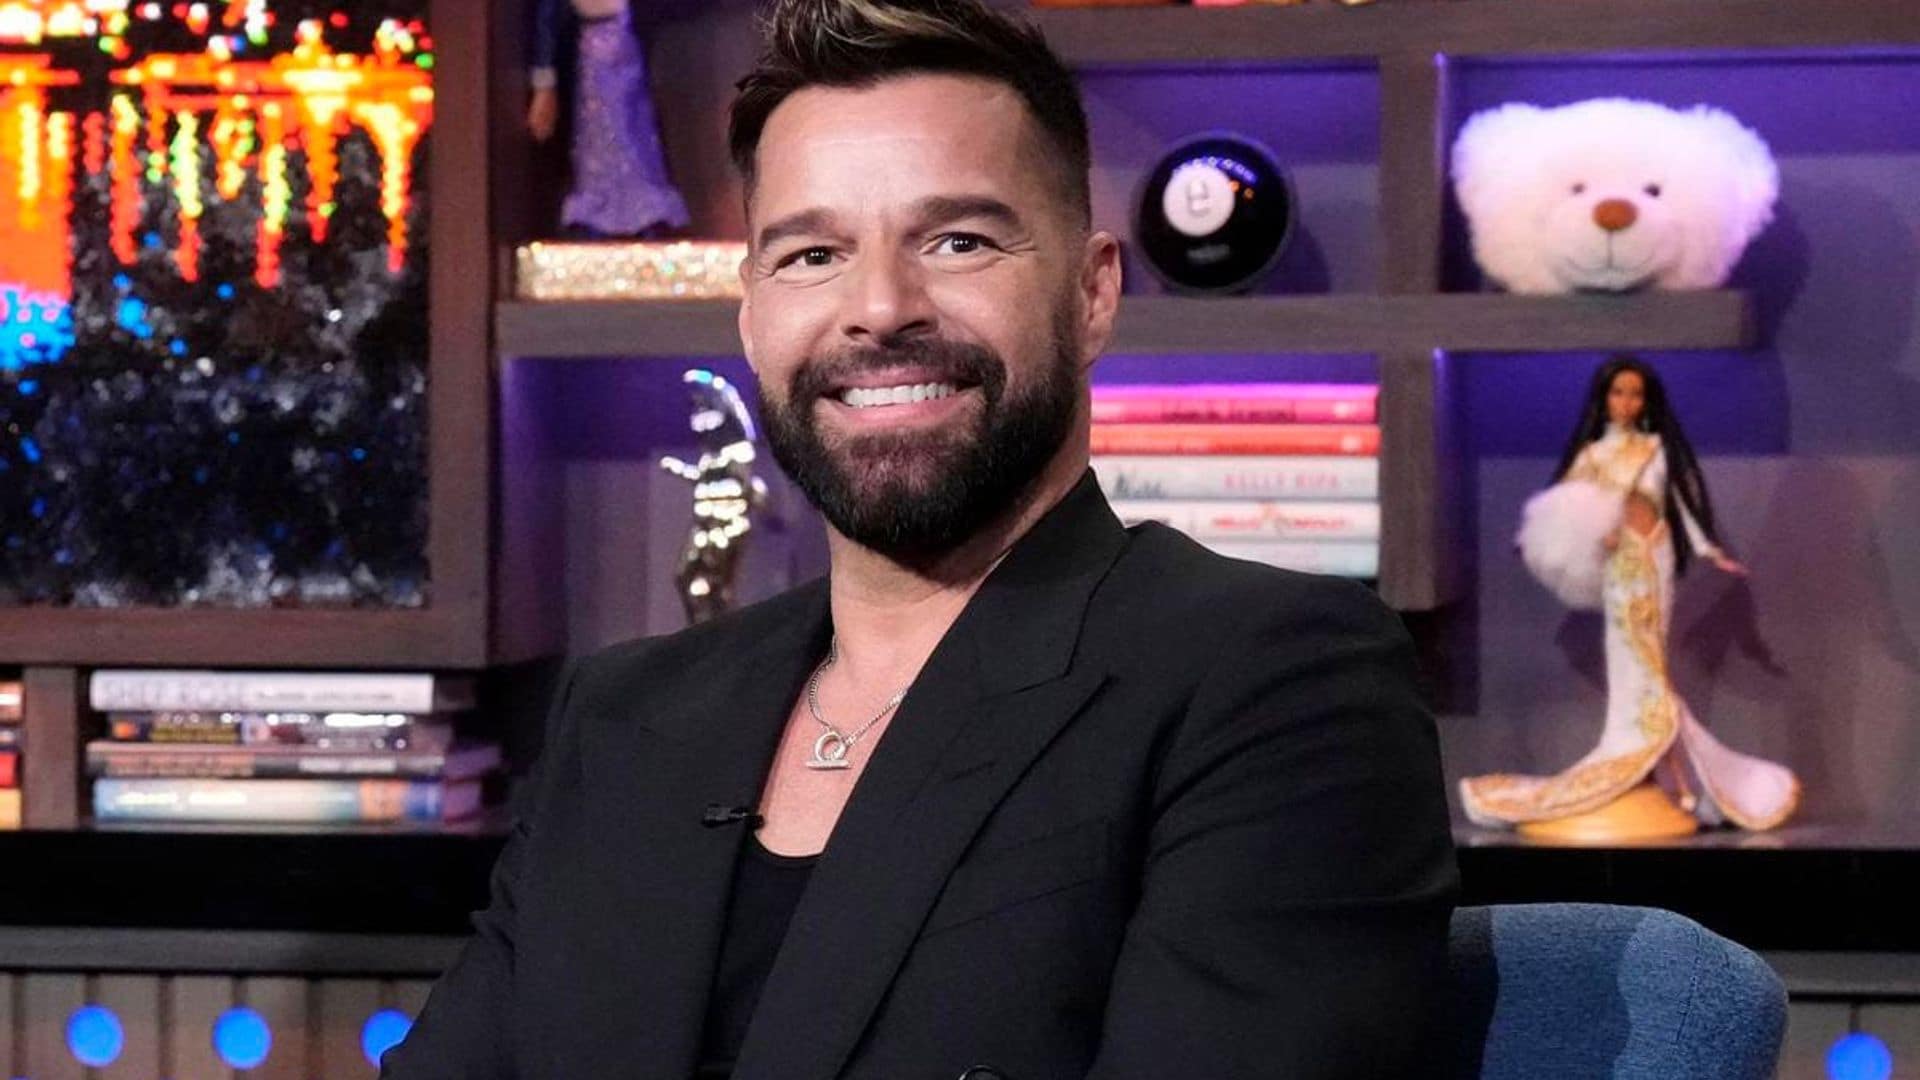 Ricky Martin says his daughter Lucia wants to become a singer: ‘I always said she was a star’